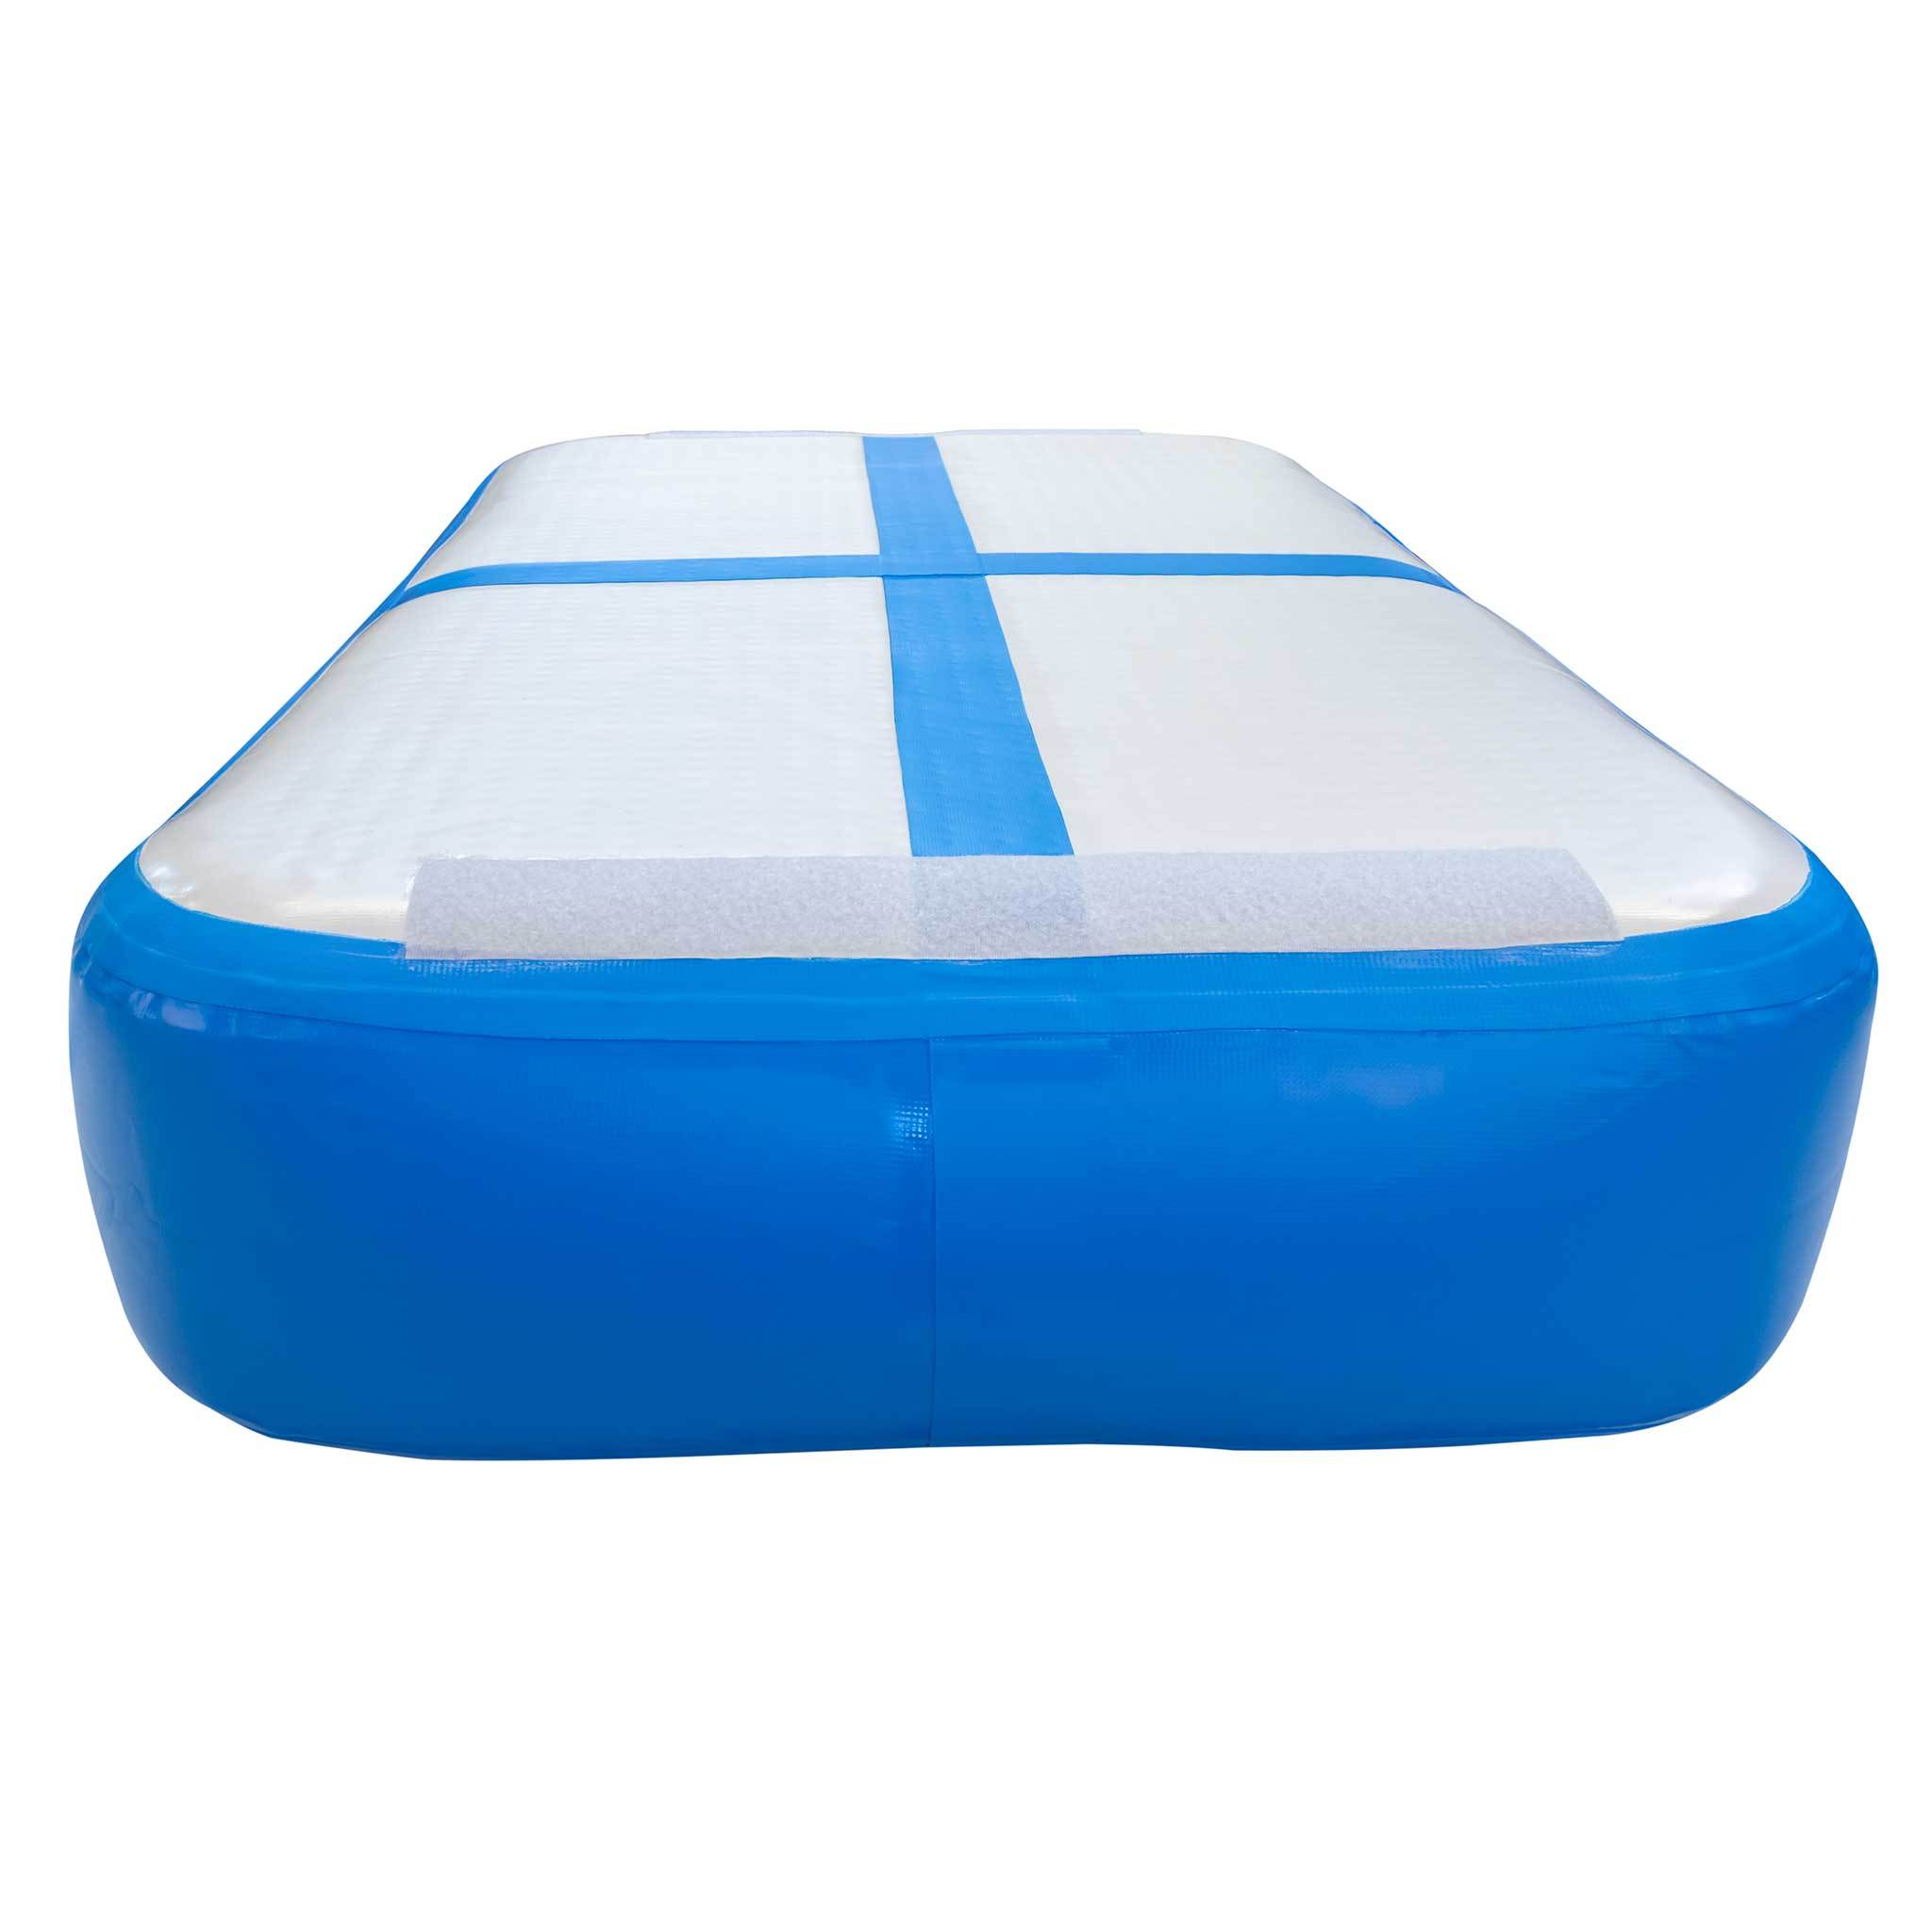 AirMat Nordic AirBlock - Free Standard Delivery - 249.00 USD